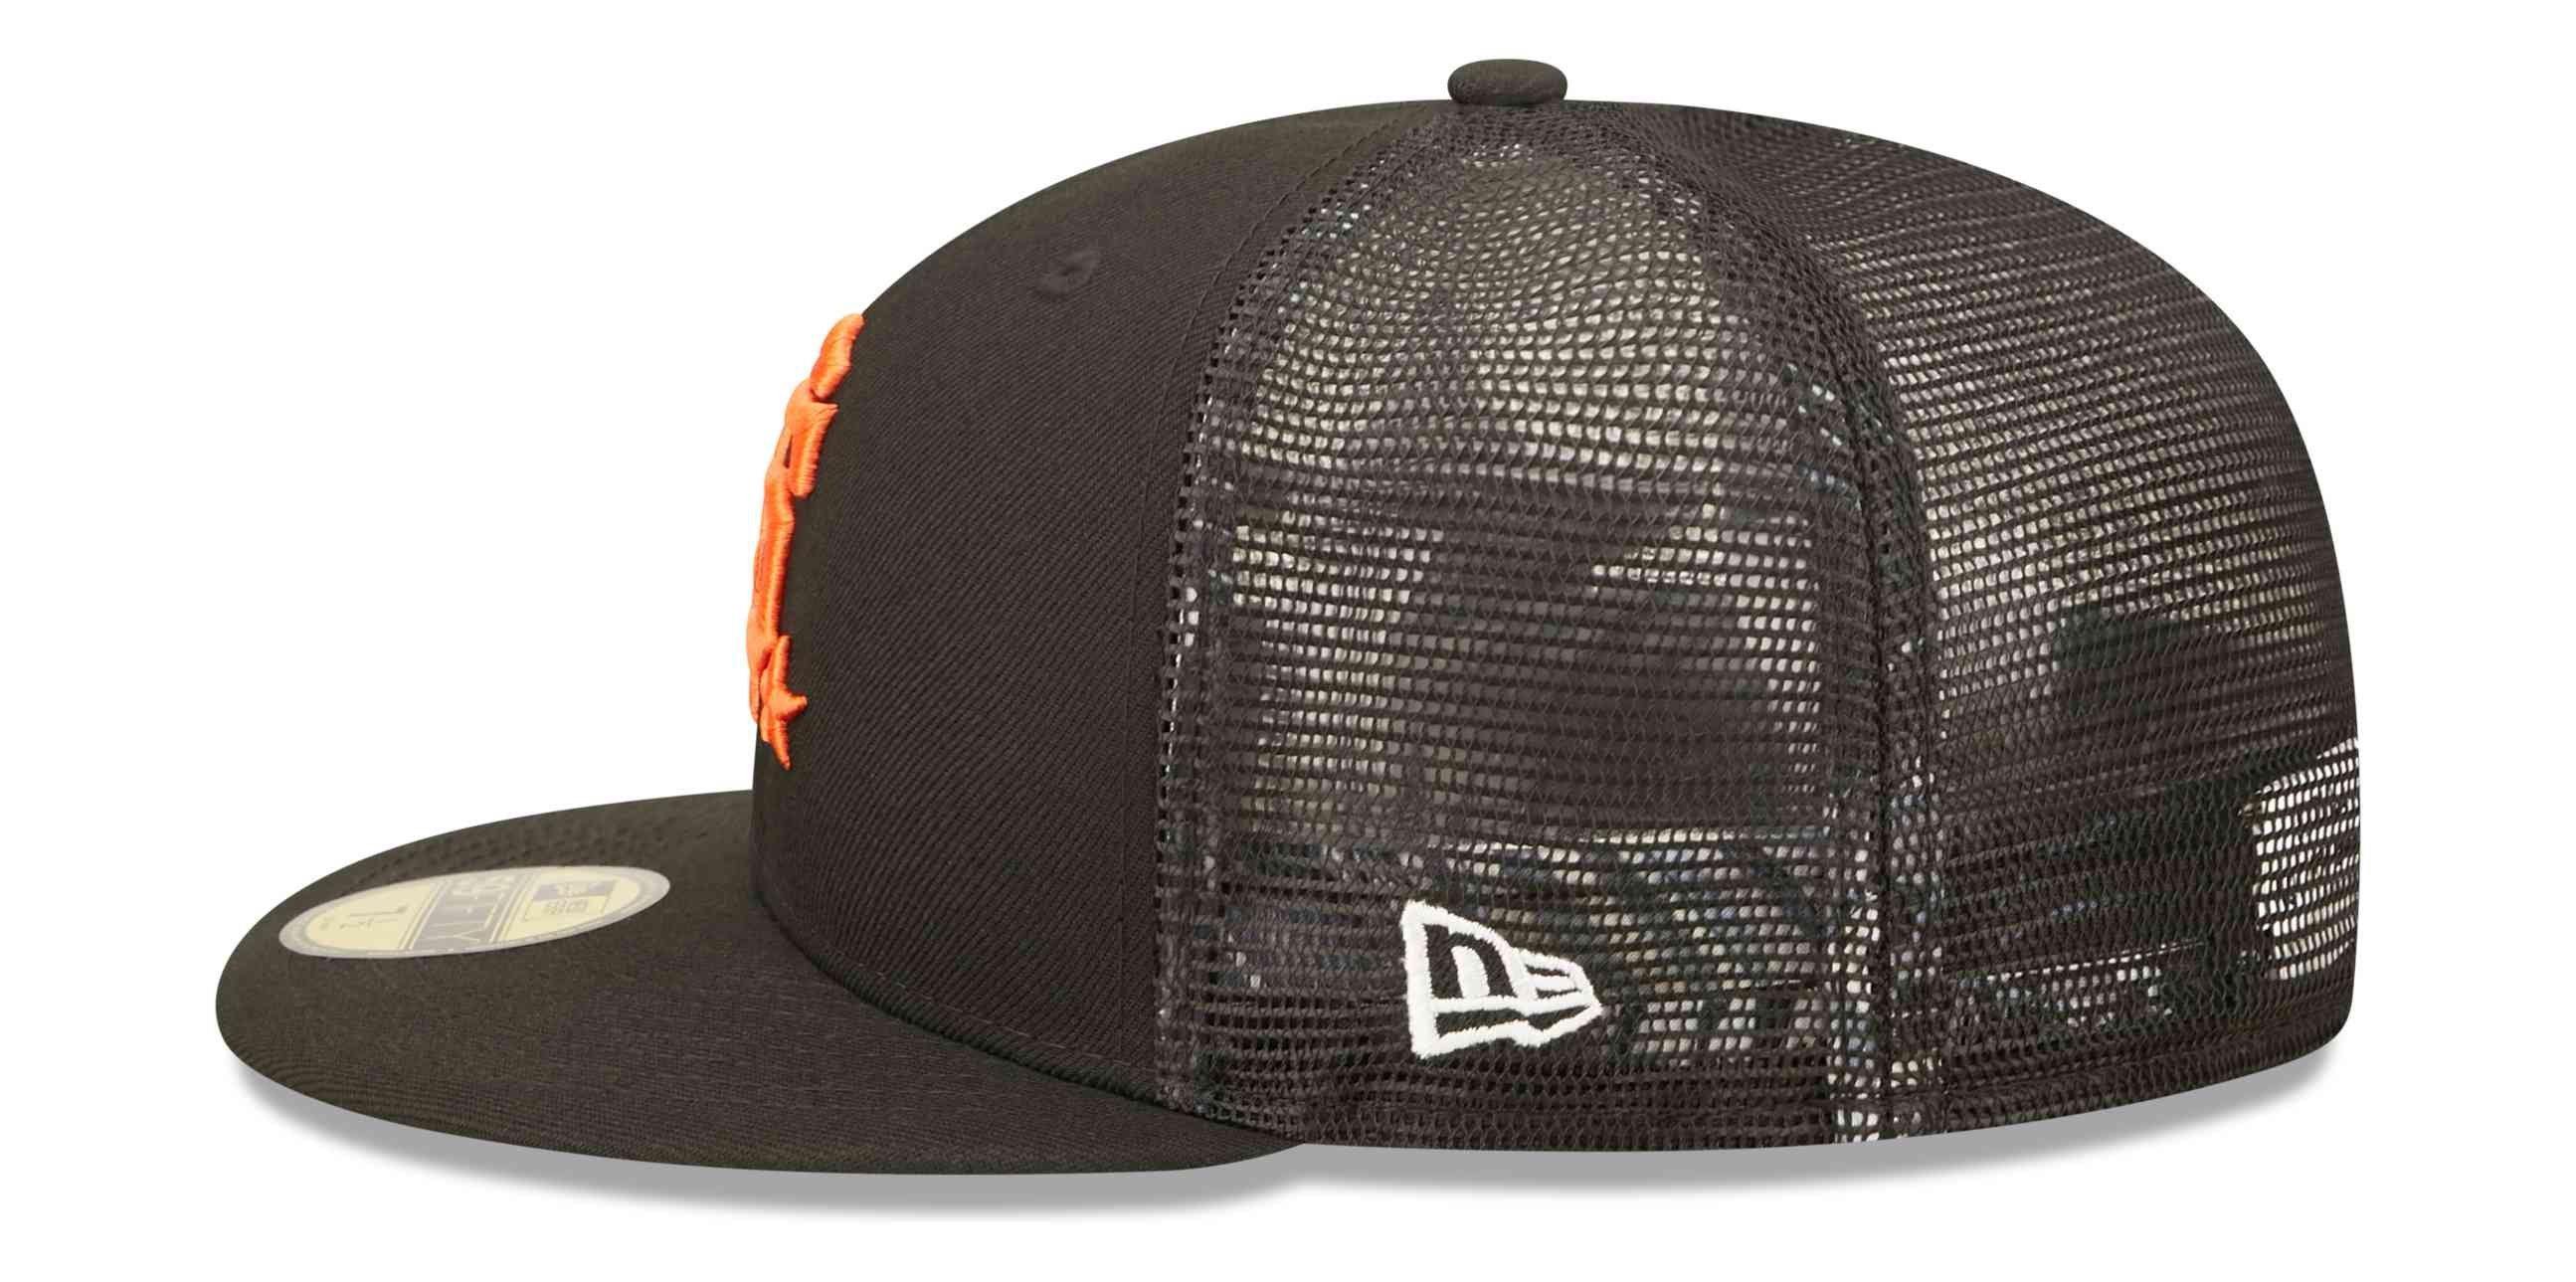 Game San Giants 22 All Star Francisco MLB 59Fifty Cap Era New Fitted